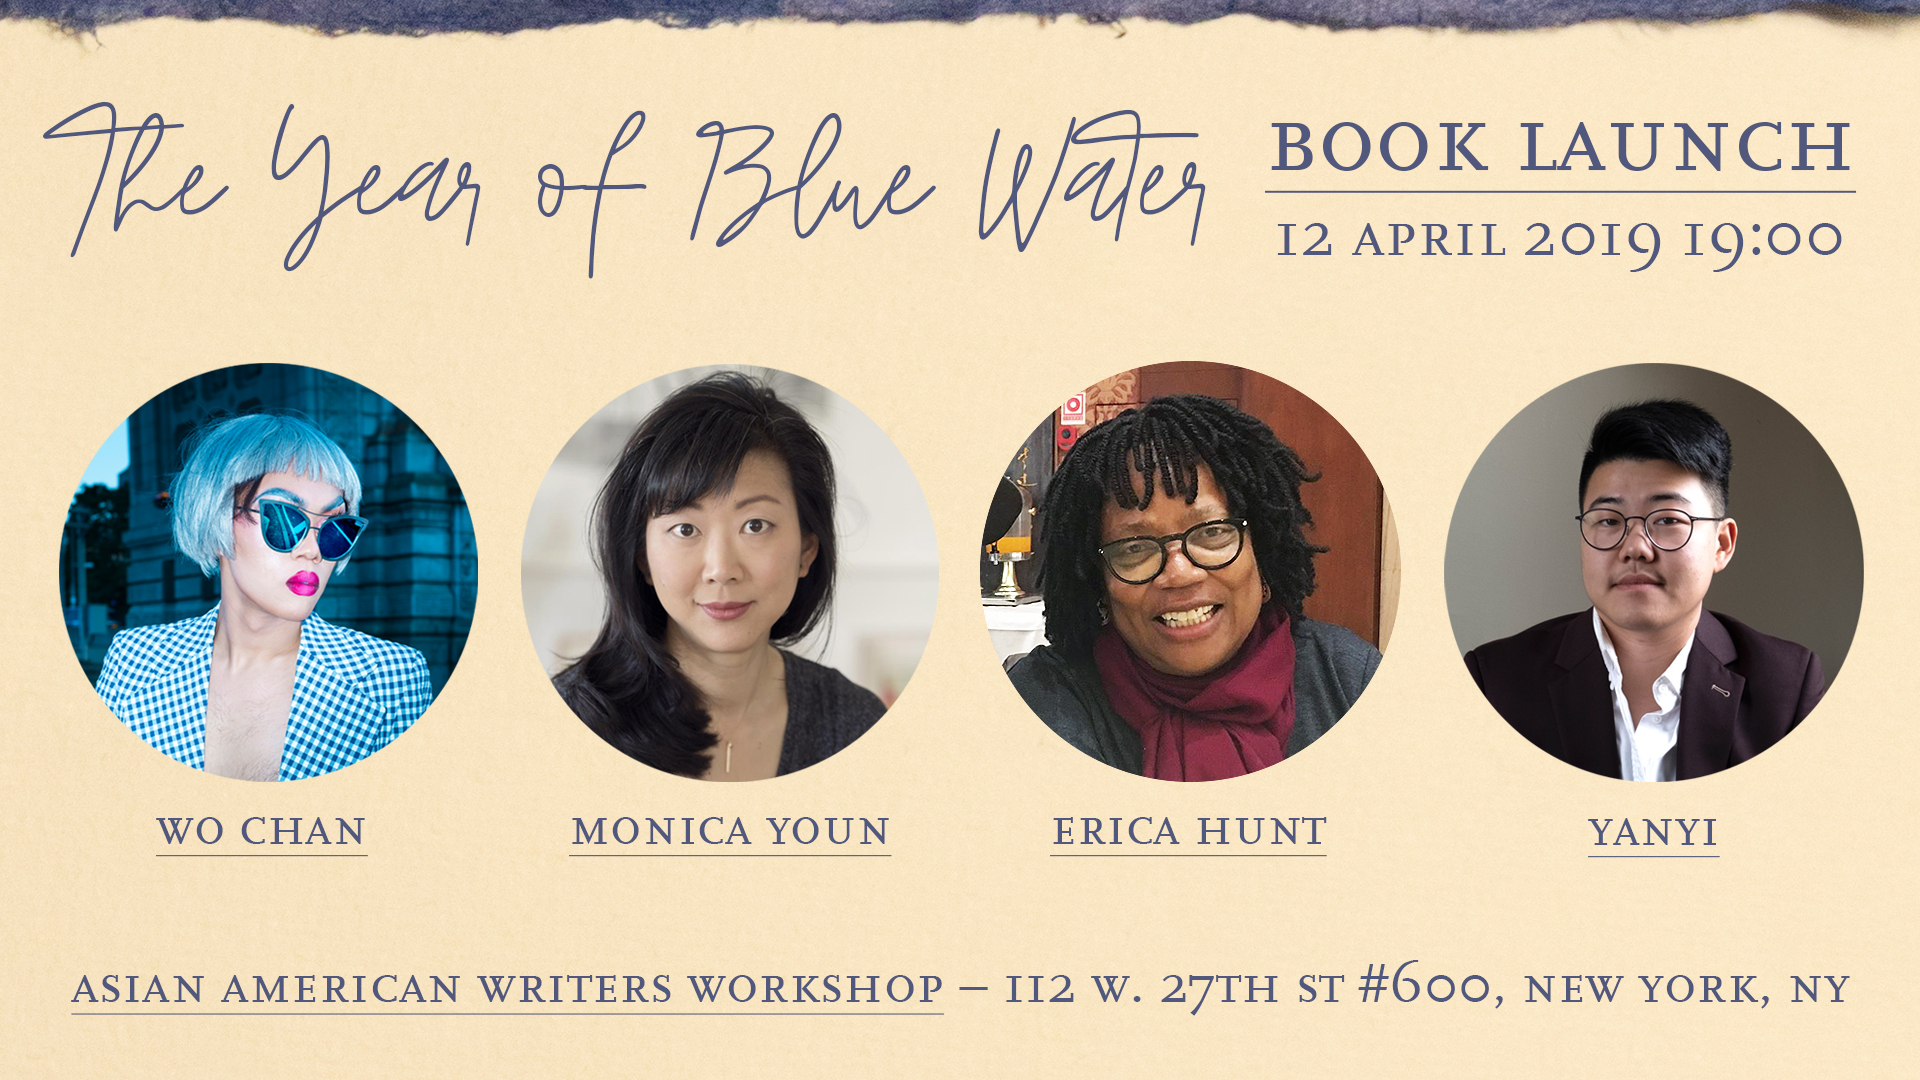 The Year of Blue Water: Book Launch